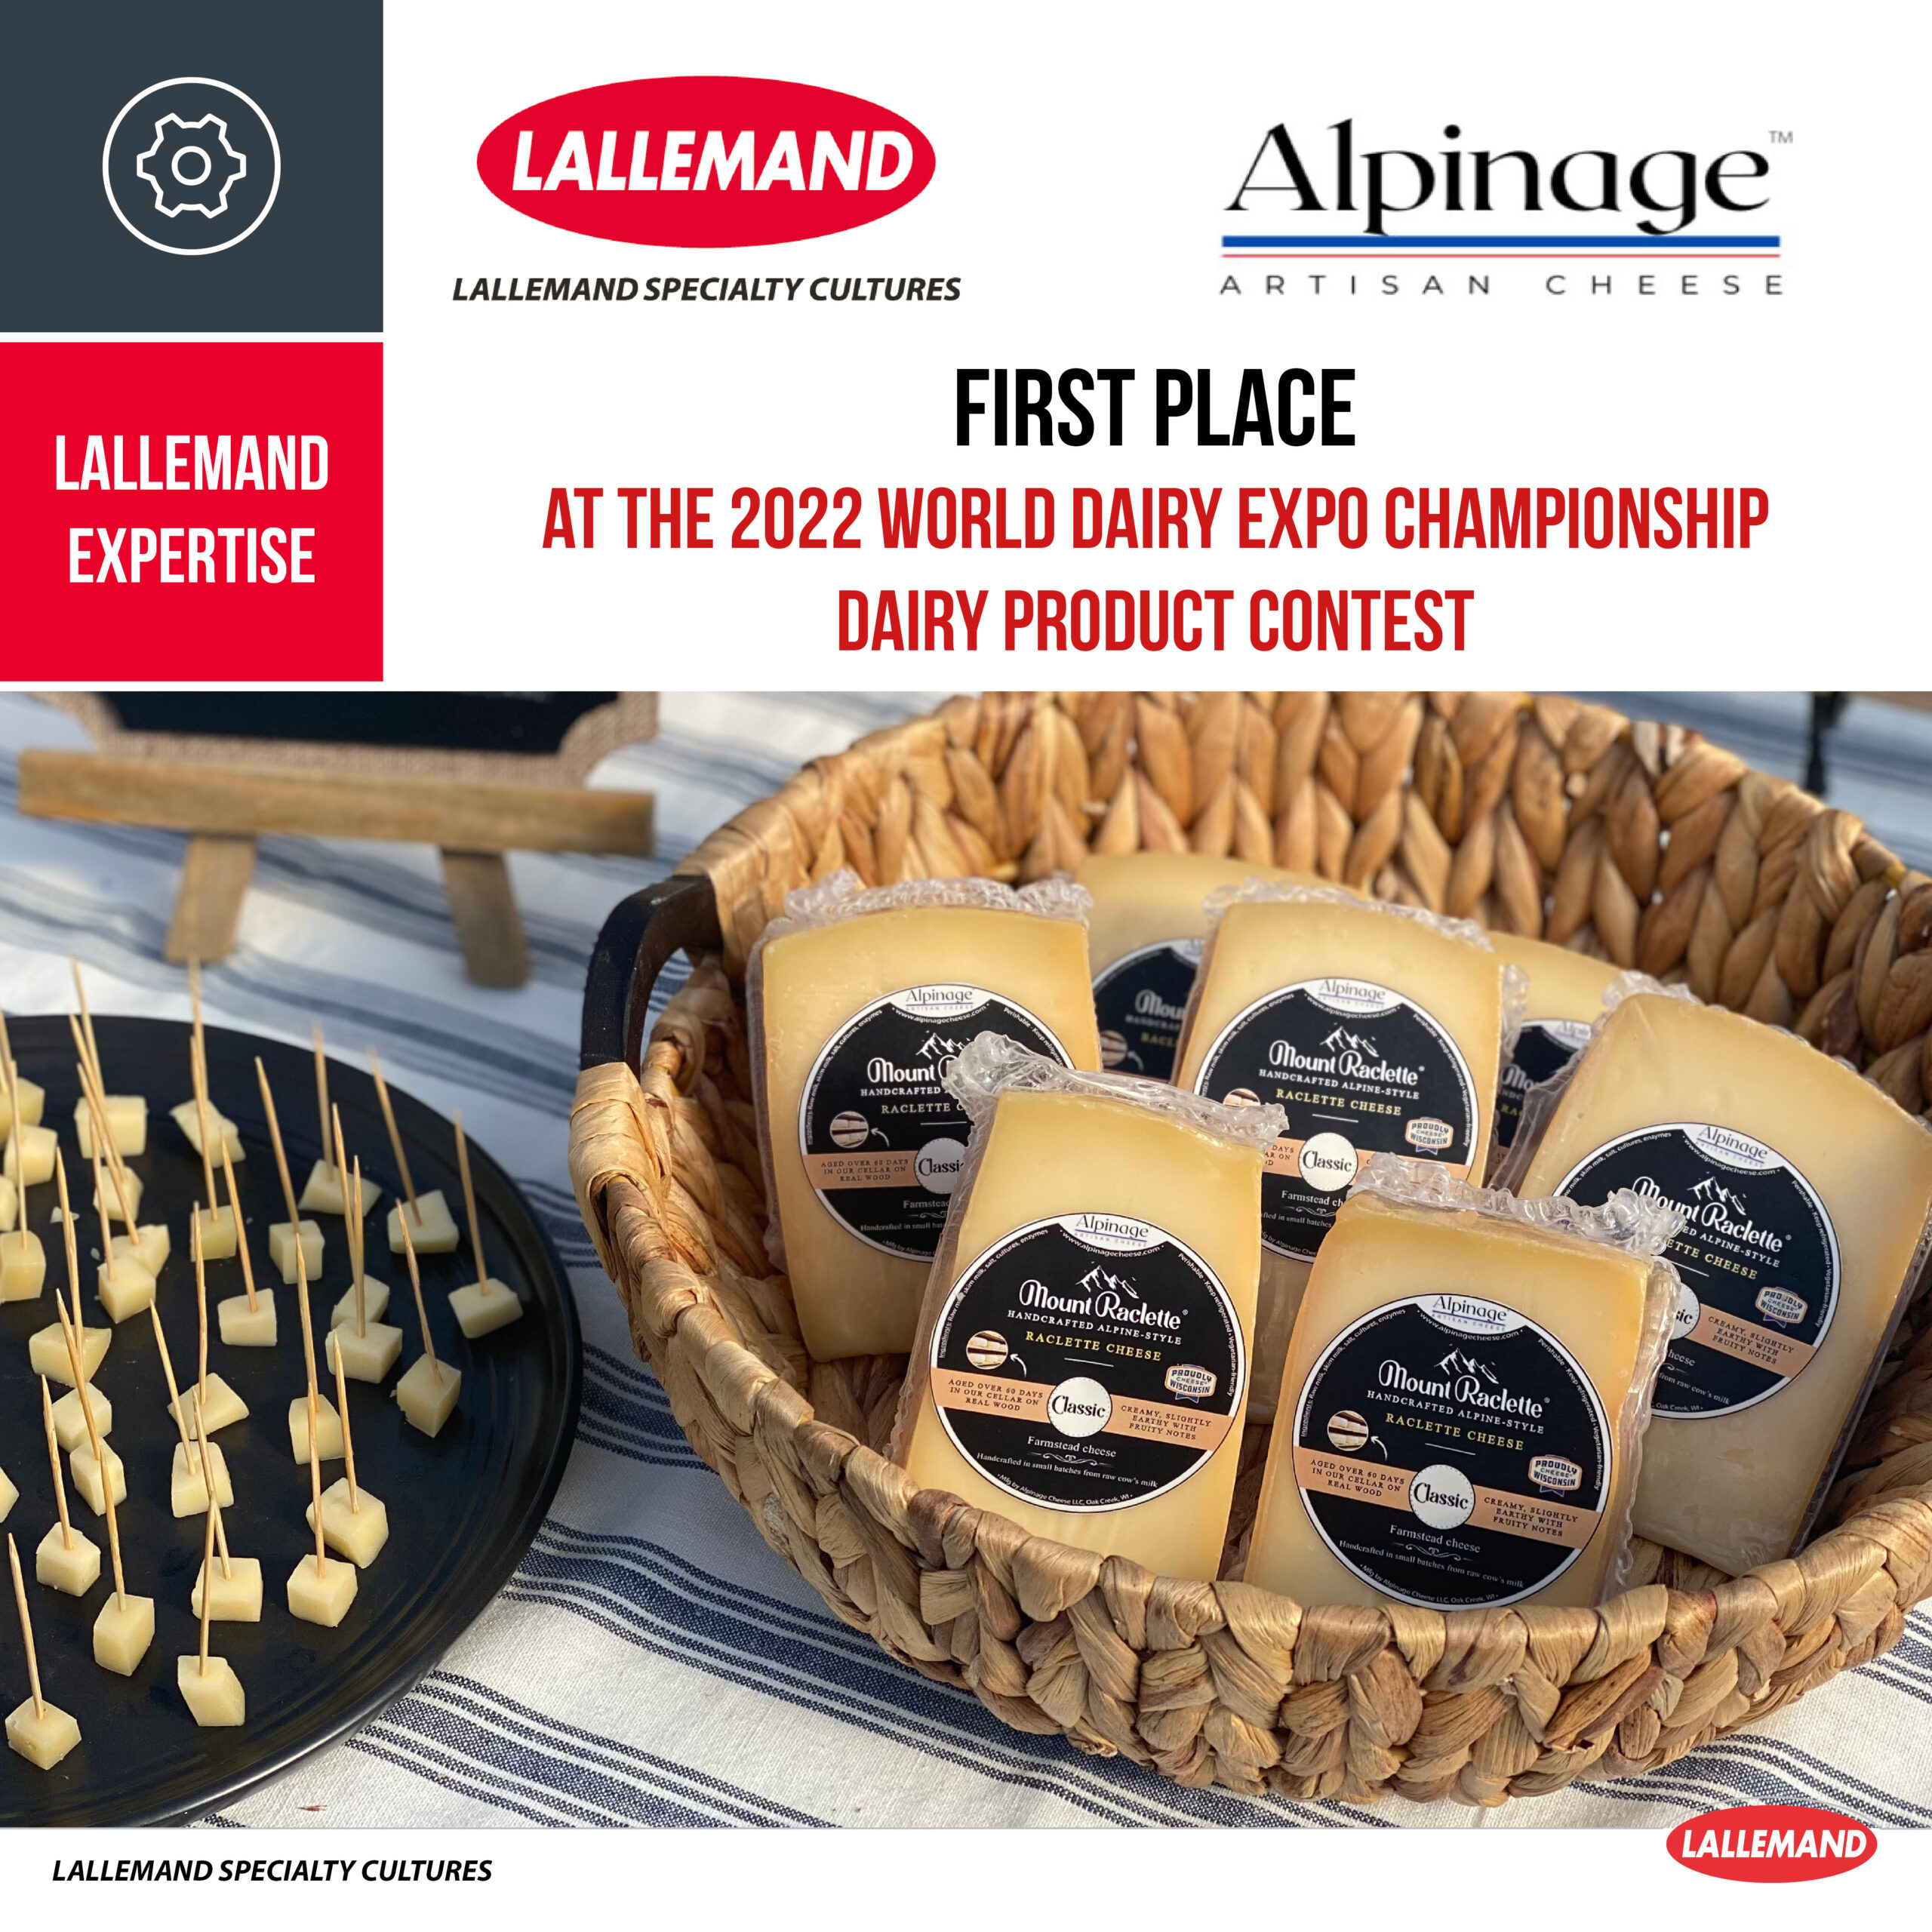 Cheese using FLAV-ANTAGE® culture awarded